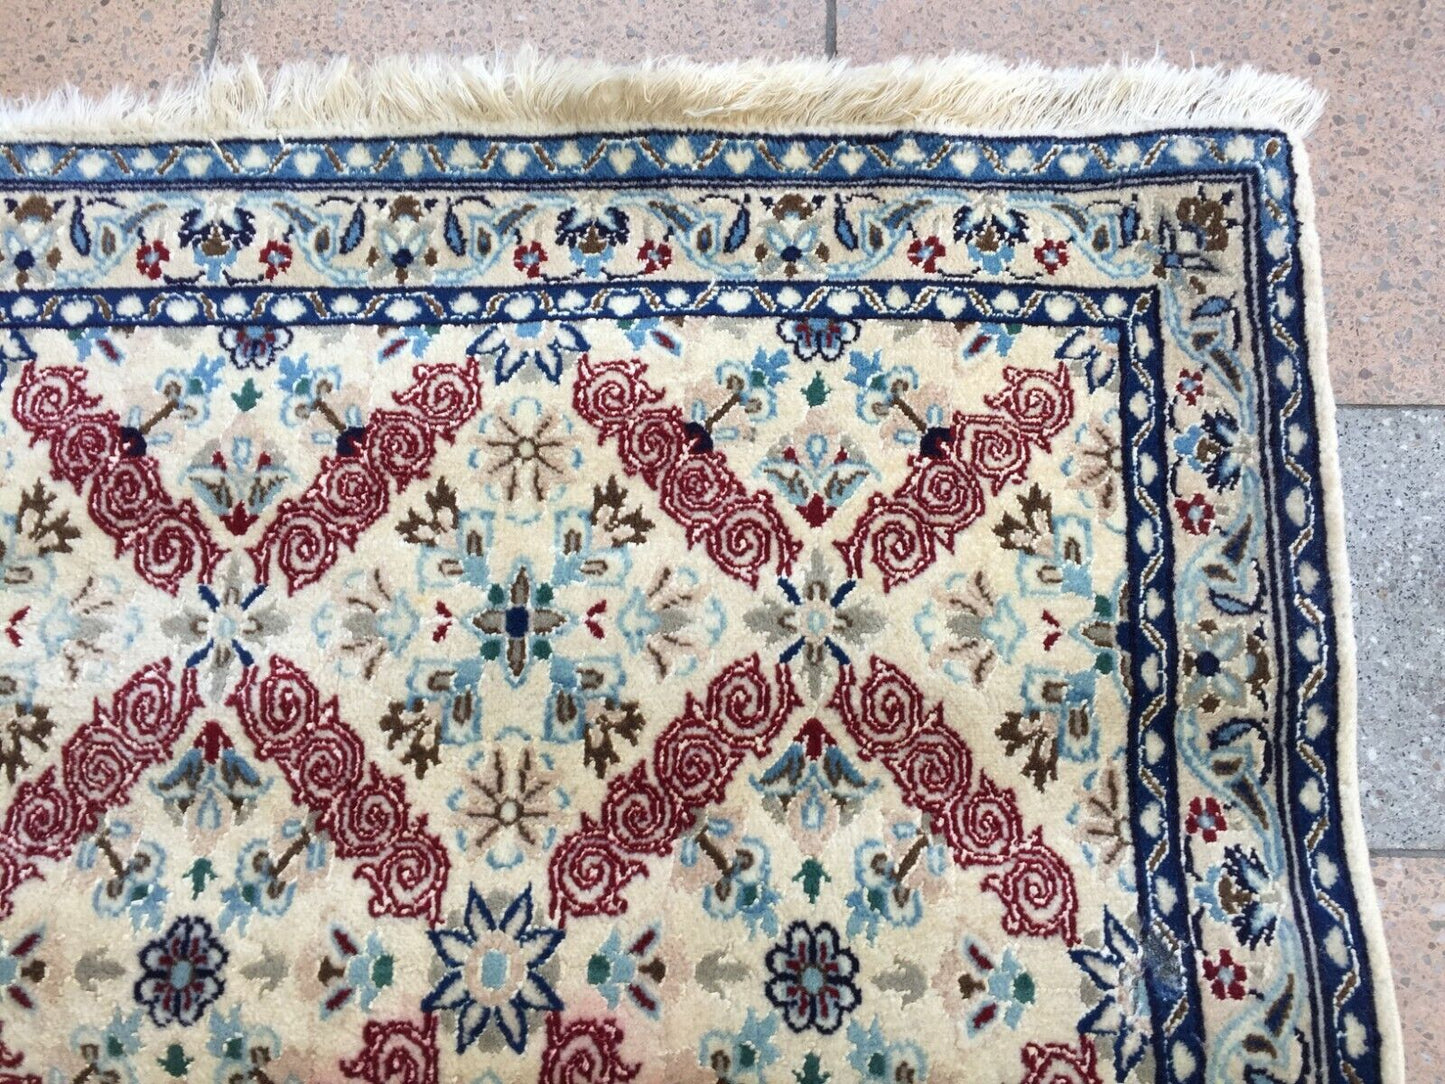 Intricate Red and Blue Diamond-Shaped Patterns with Floral Motifs on Handmade Nain Rug - 1960s